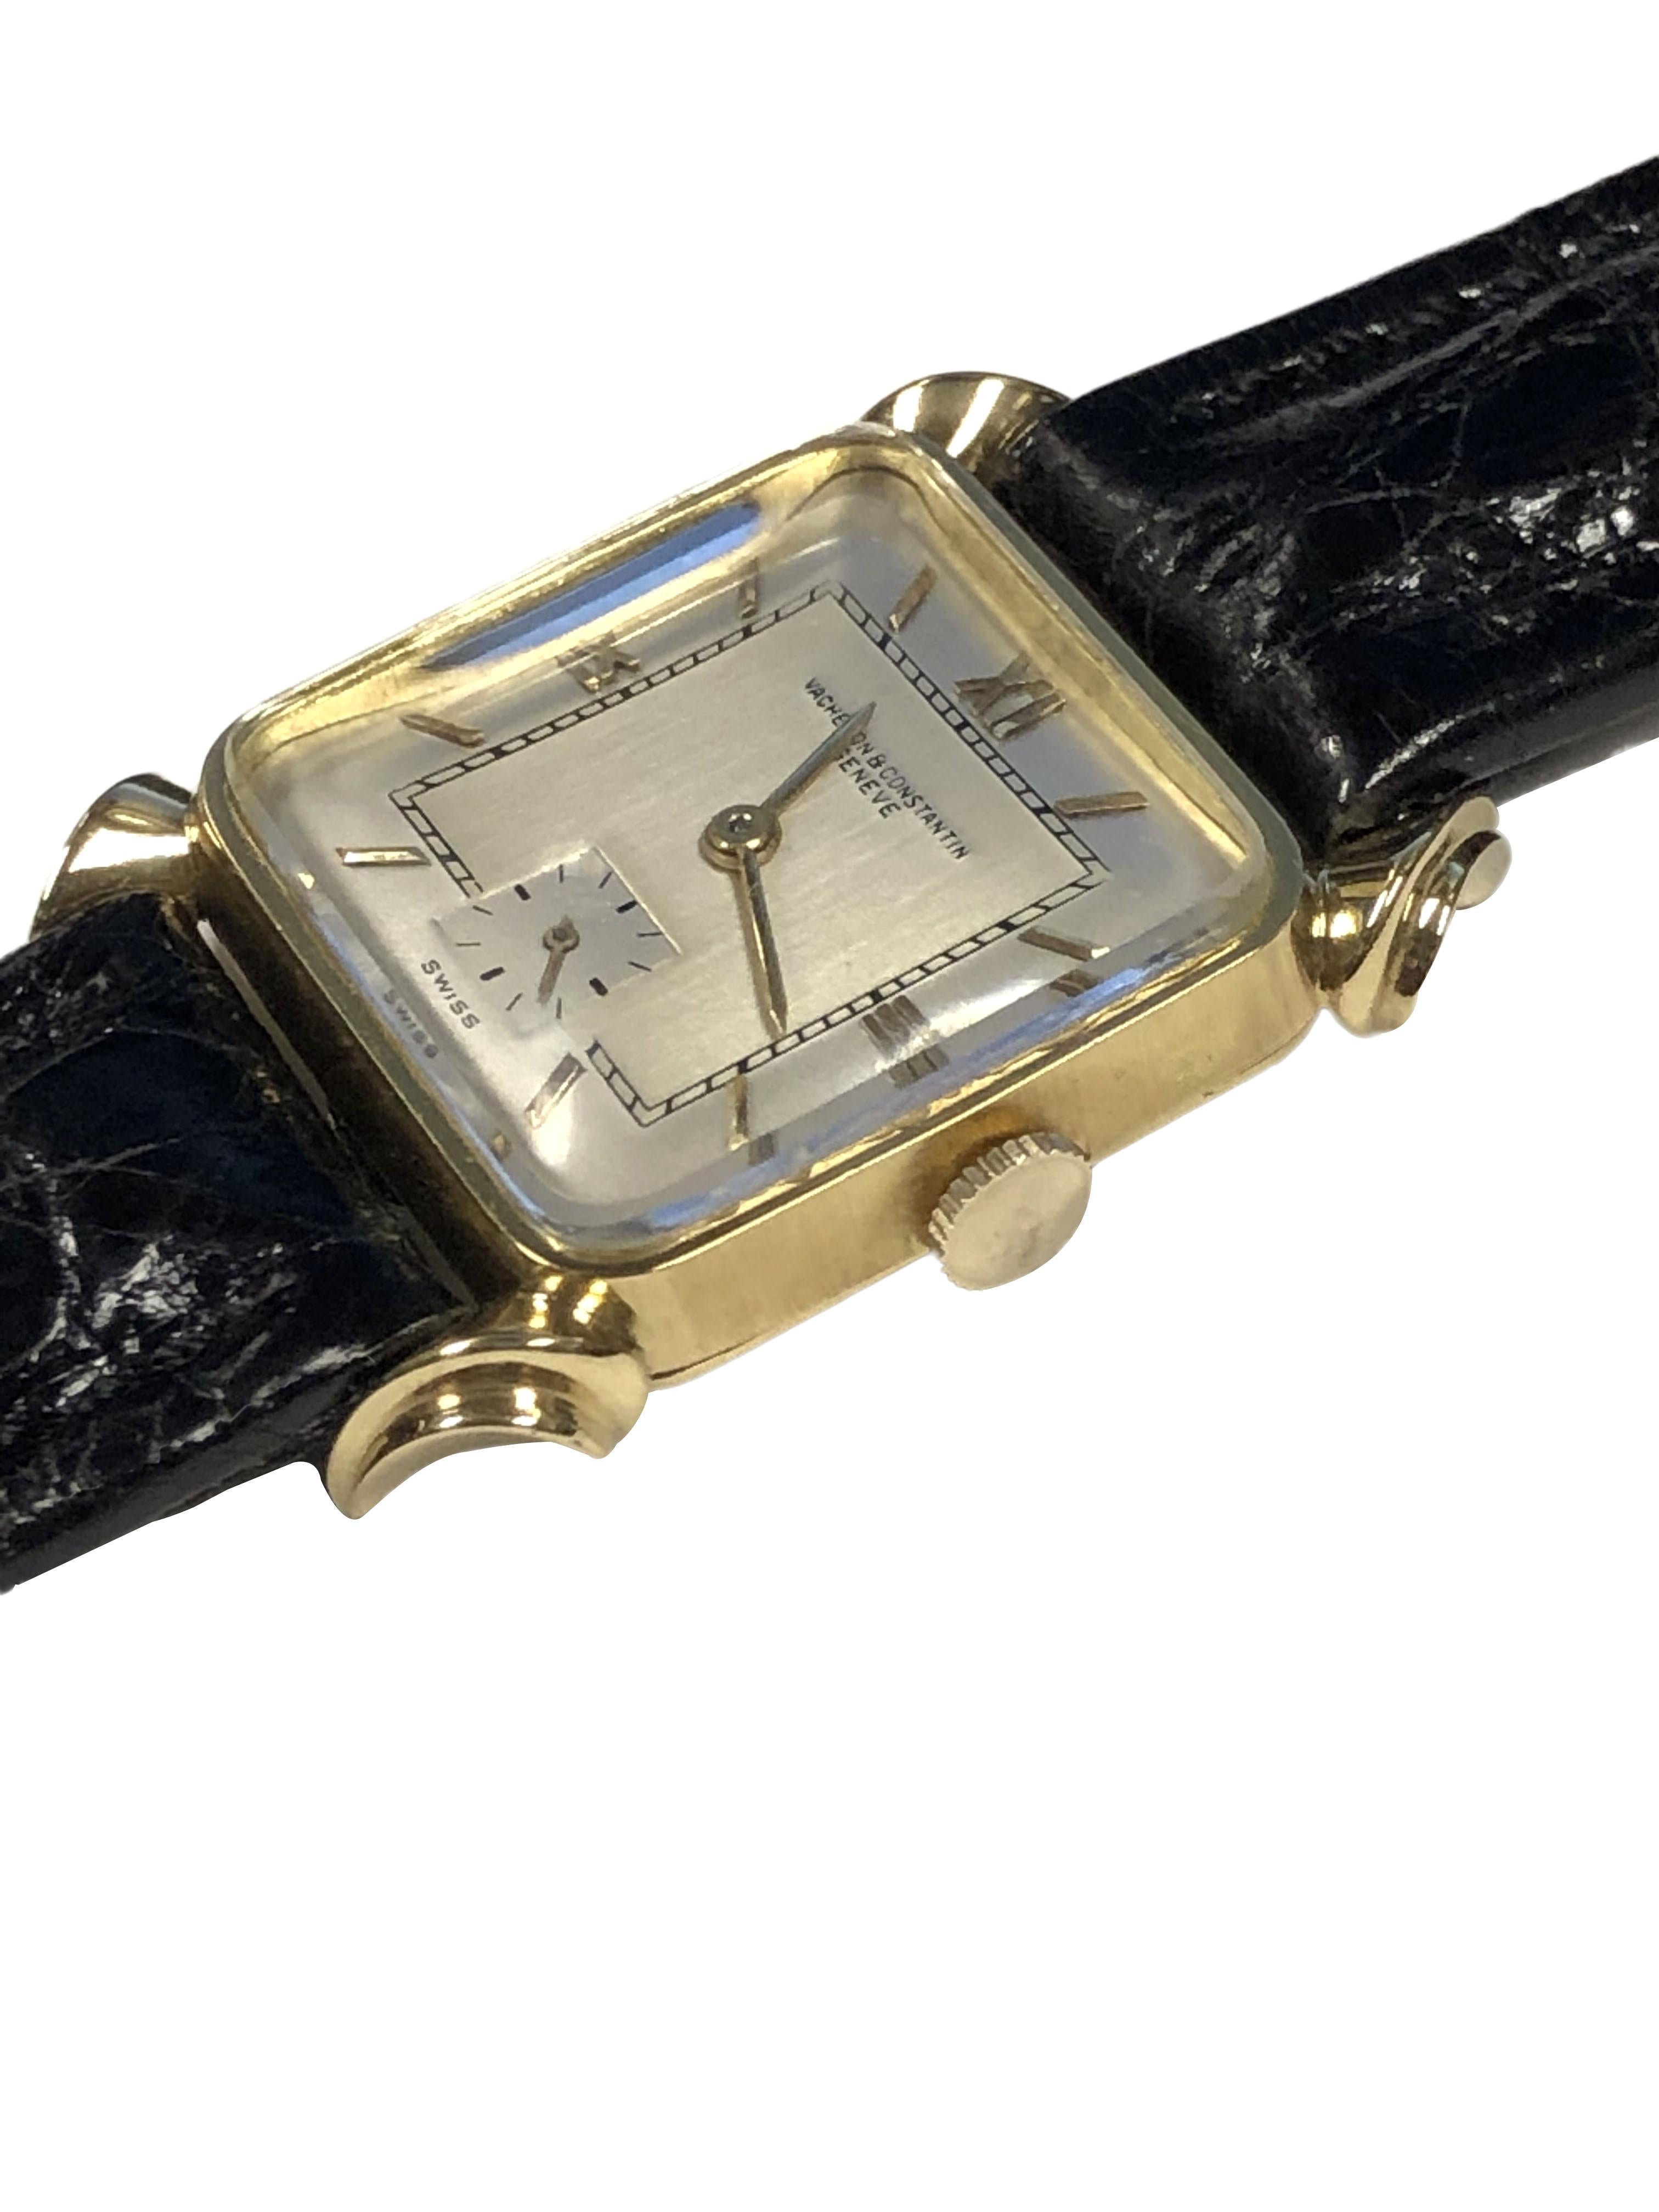 Circa 1949 Vacheron & Constantin Wrist Watch, 24 X 25 M.M. 2 Piece 18K Yellow Gold case with fancy Scroll Lugs. 17 Jewel, mechanical, manual wind movement. original silver satin dial with raised markers and a sub seconds chapter, original thick